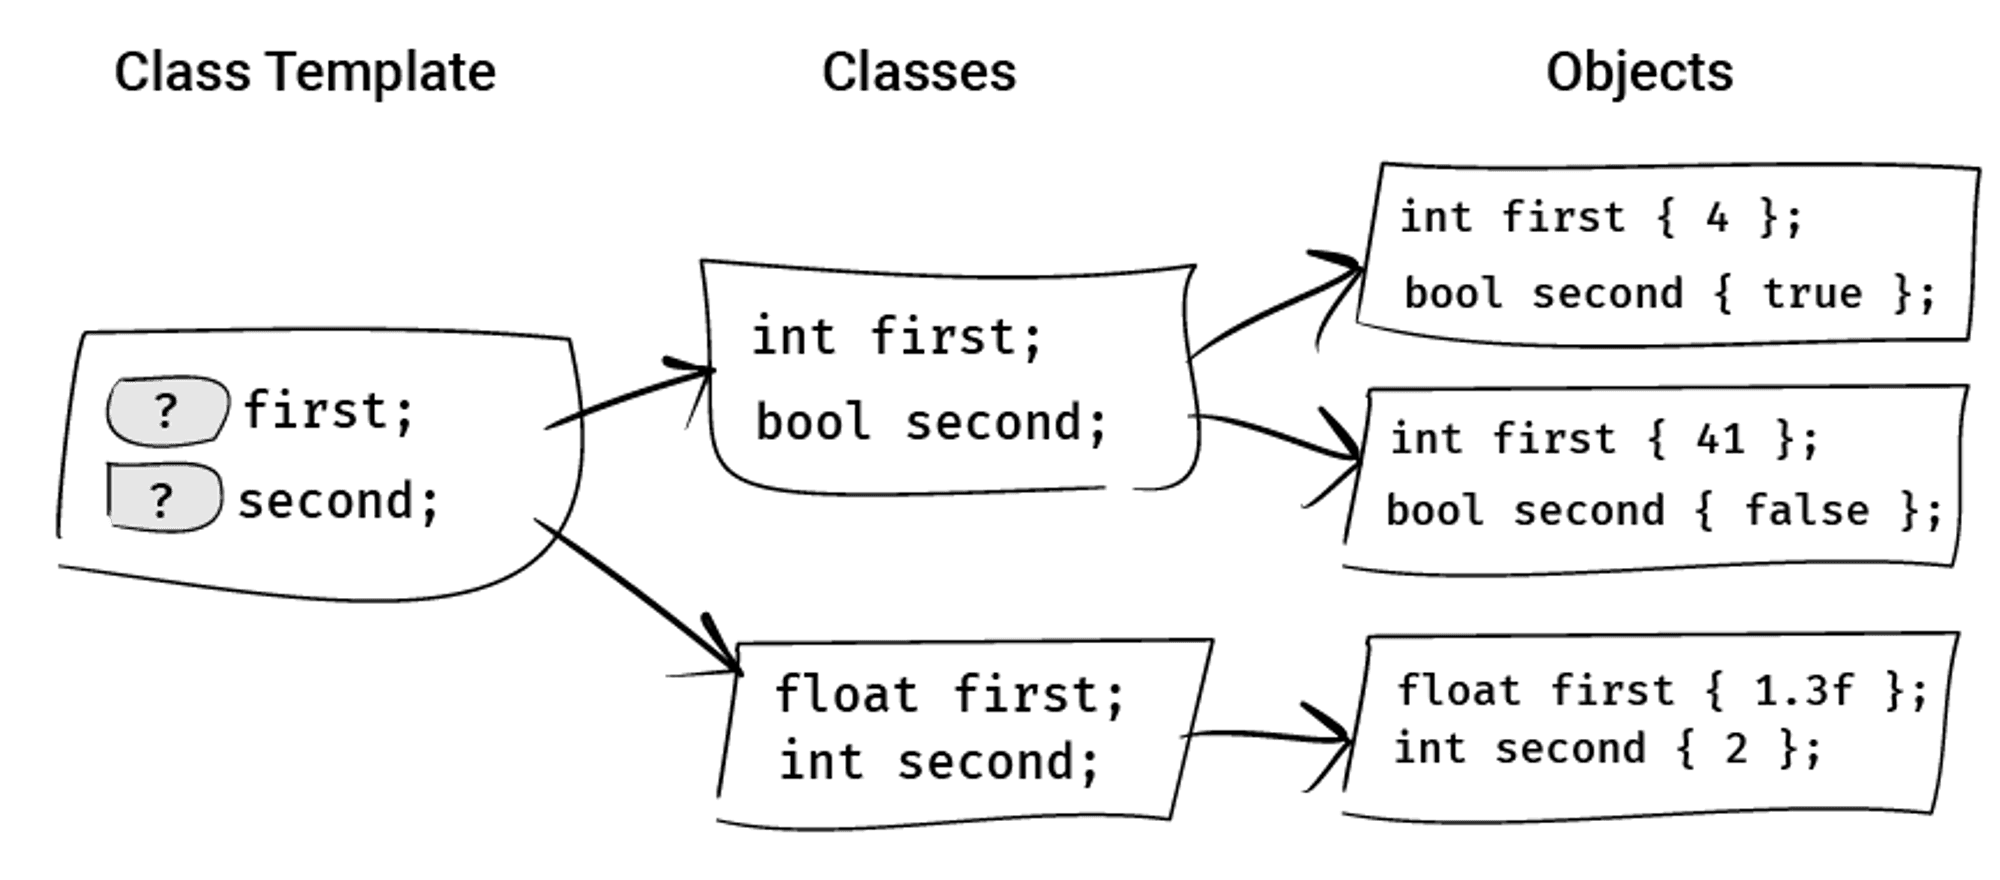 Diagram showing the difference between class templates, classes and objects